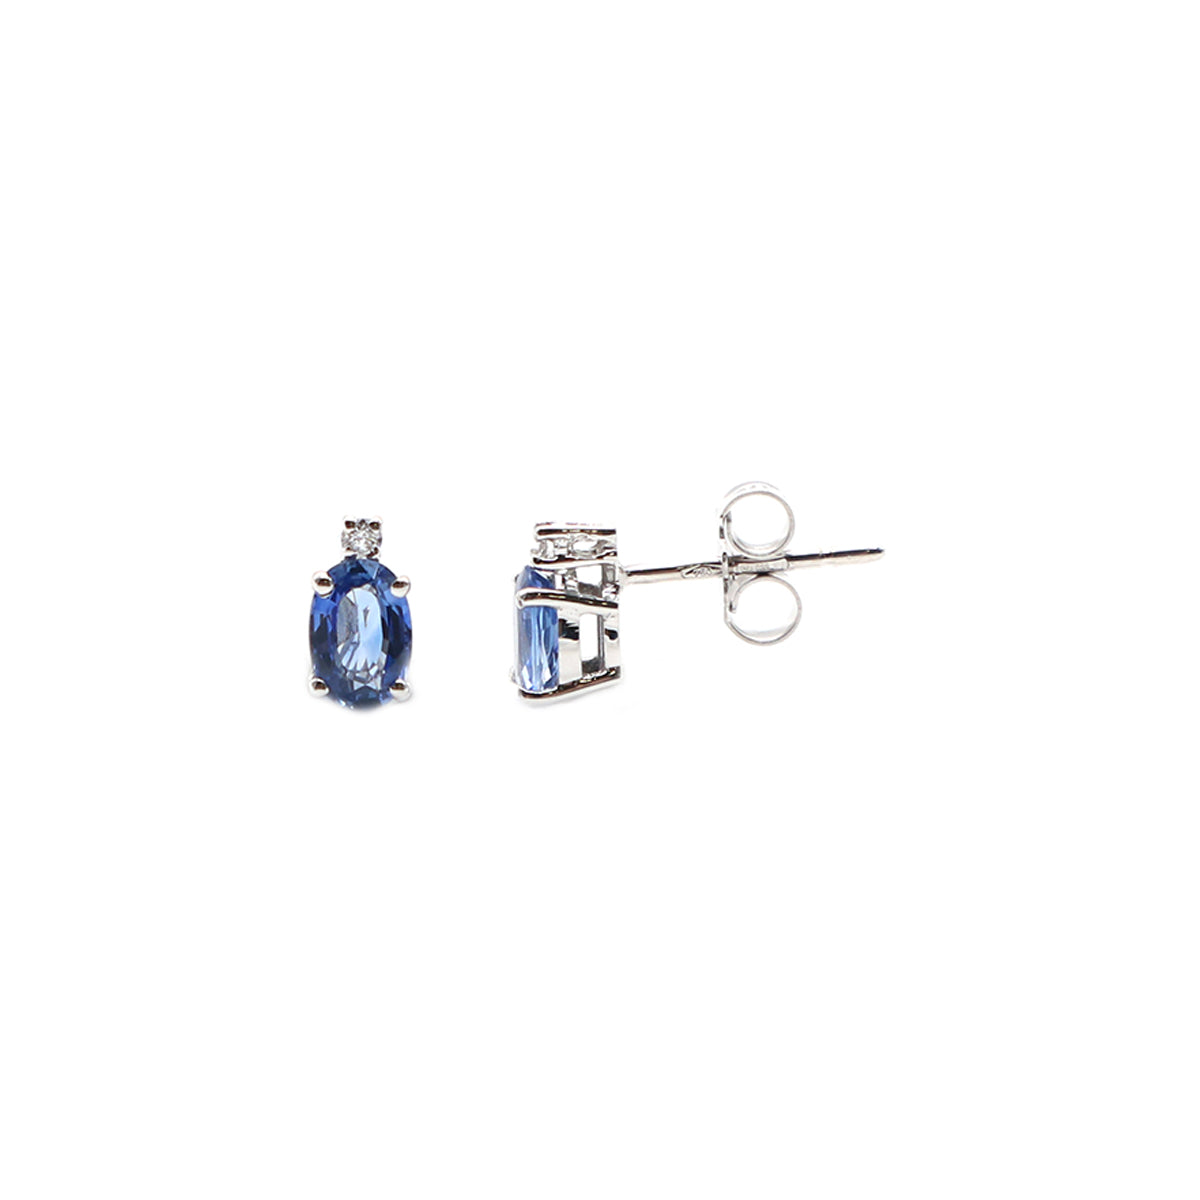 306 gold earrings with sapphire.